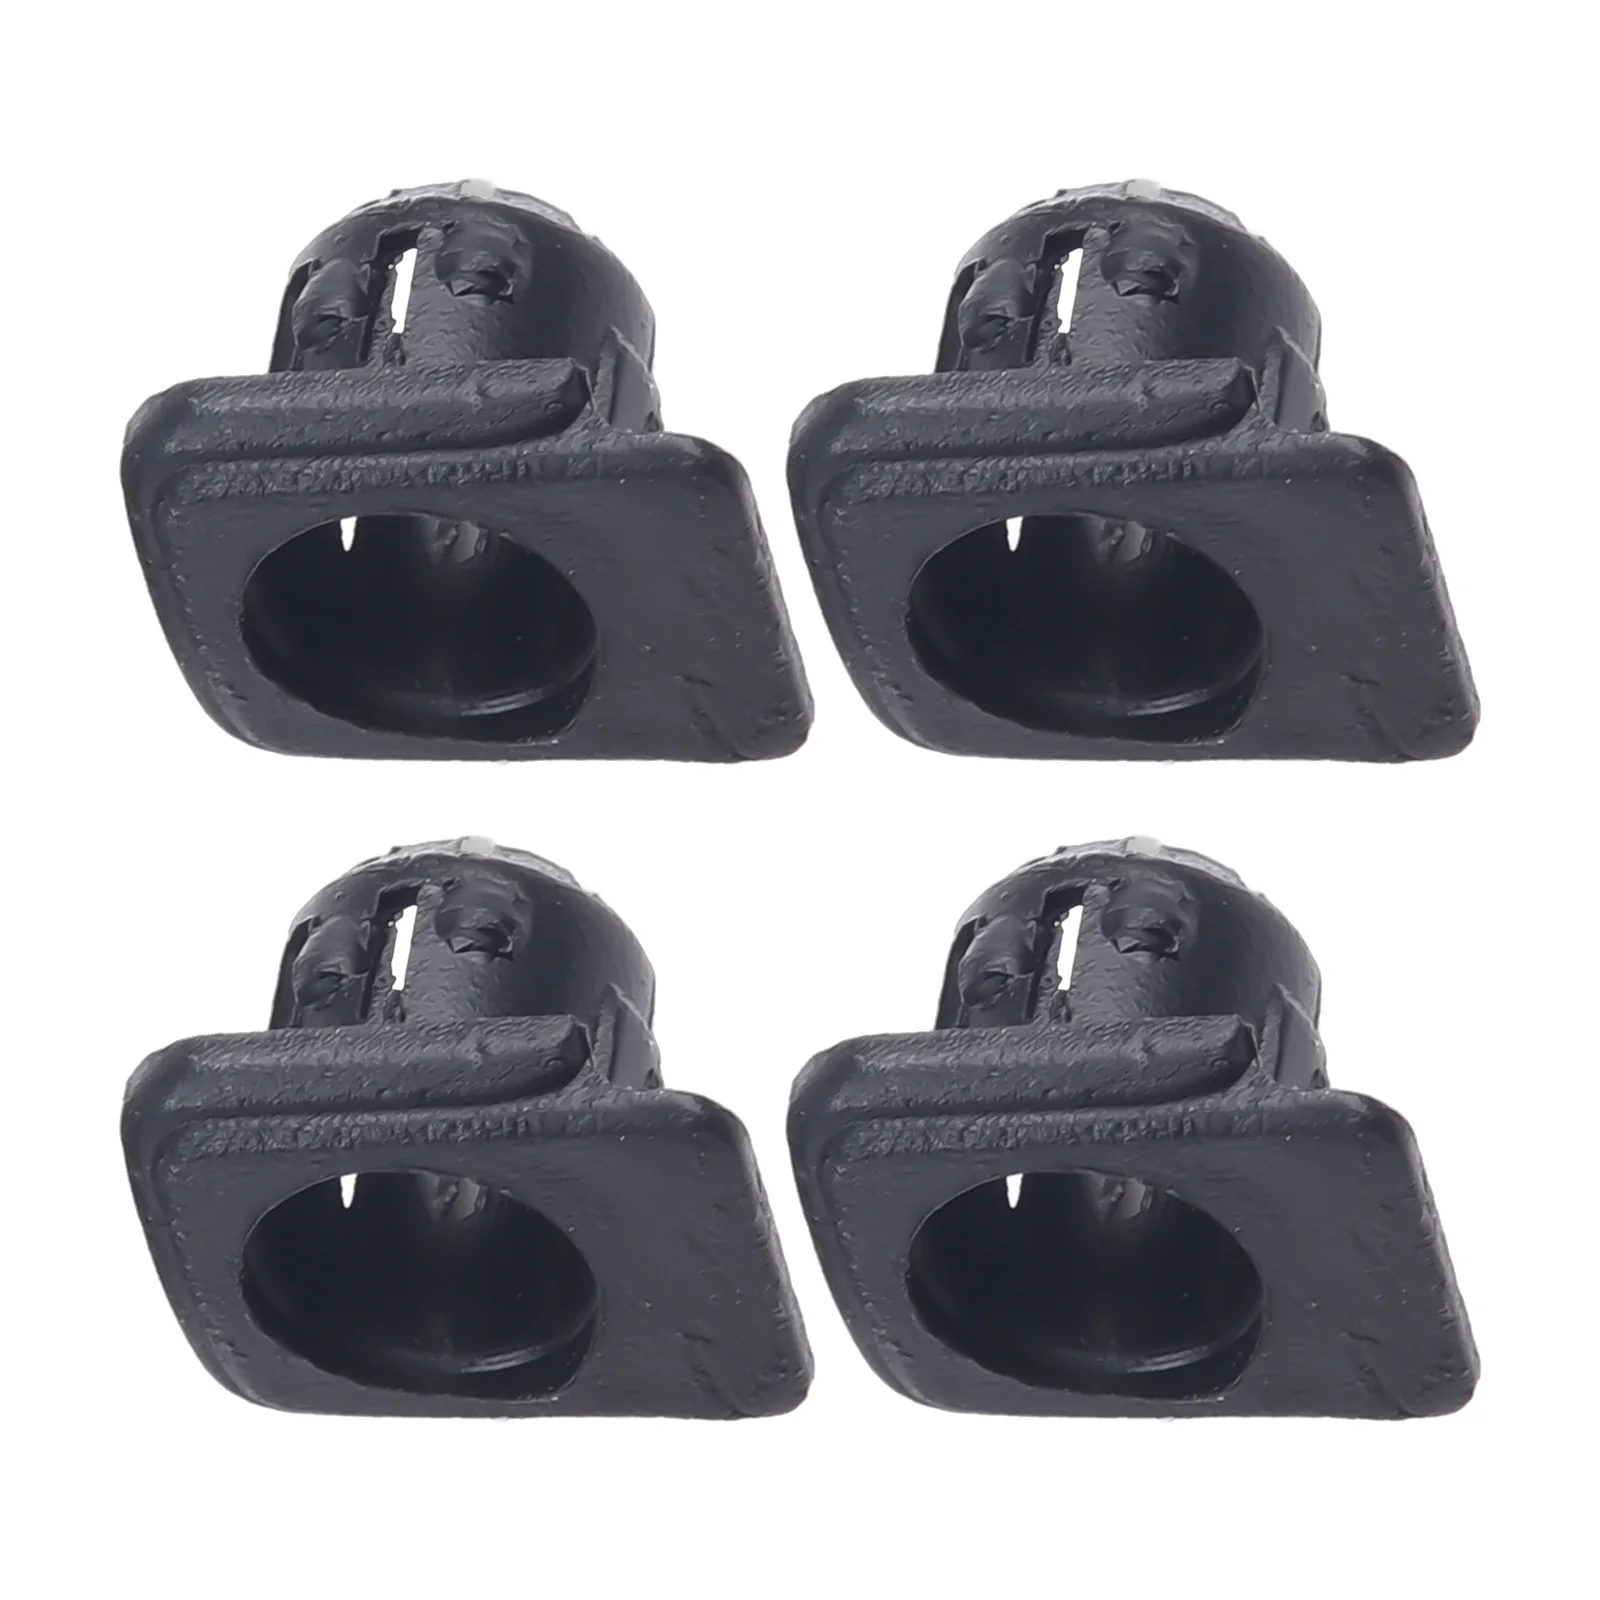 

High Reliability Car Door Safety Lock Button Base Locking Knob for Golf Mk2 Mk3 191837187 Stable Characteristics